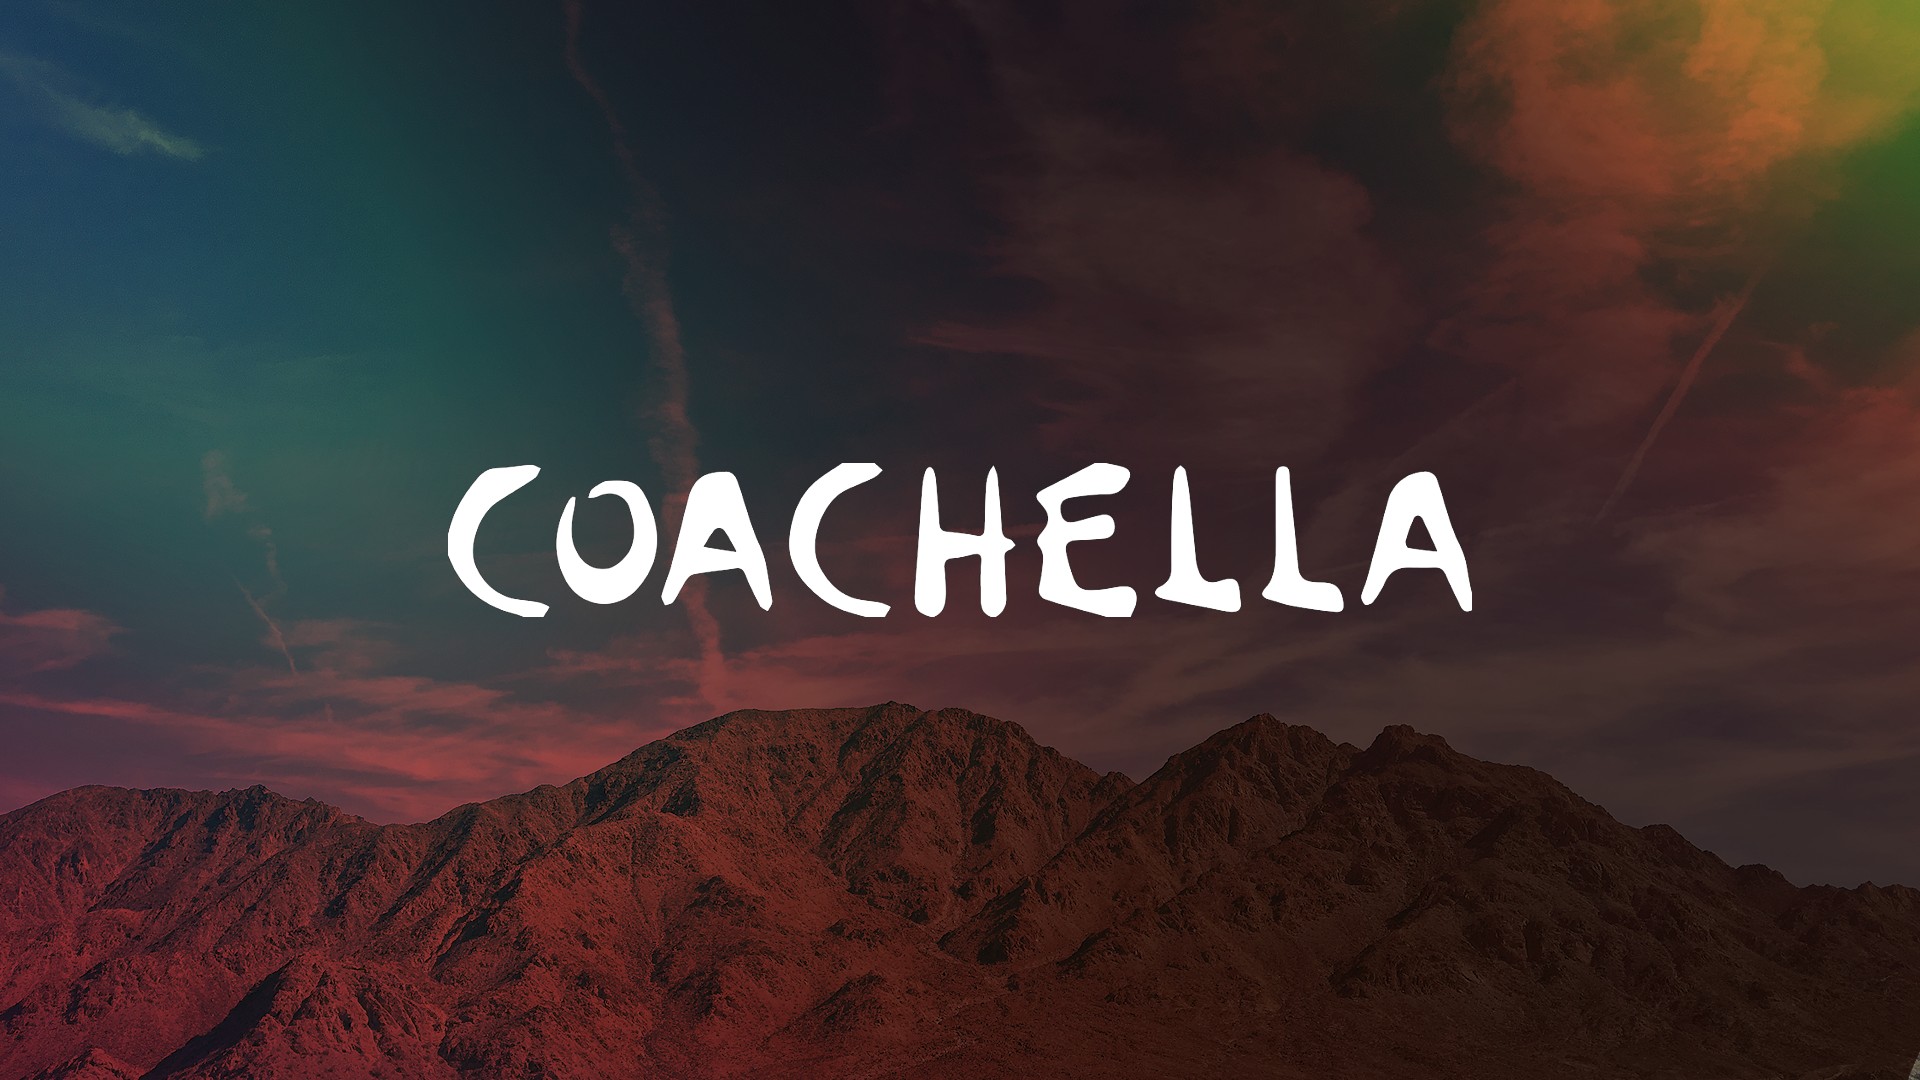 Wallpapers Computer Coachella 2019 with high-resolution 1920x1080 pixel. You can use this wallpaper for your Desktop Computer Backgrounds, Mac Wallpapers, Android Lock screen or iPhone Screensavers and another smartphone device